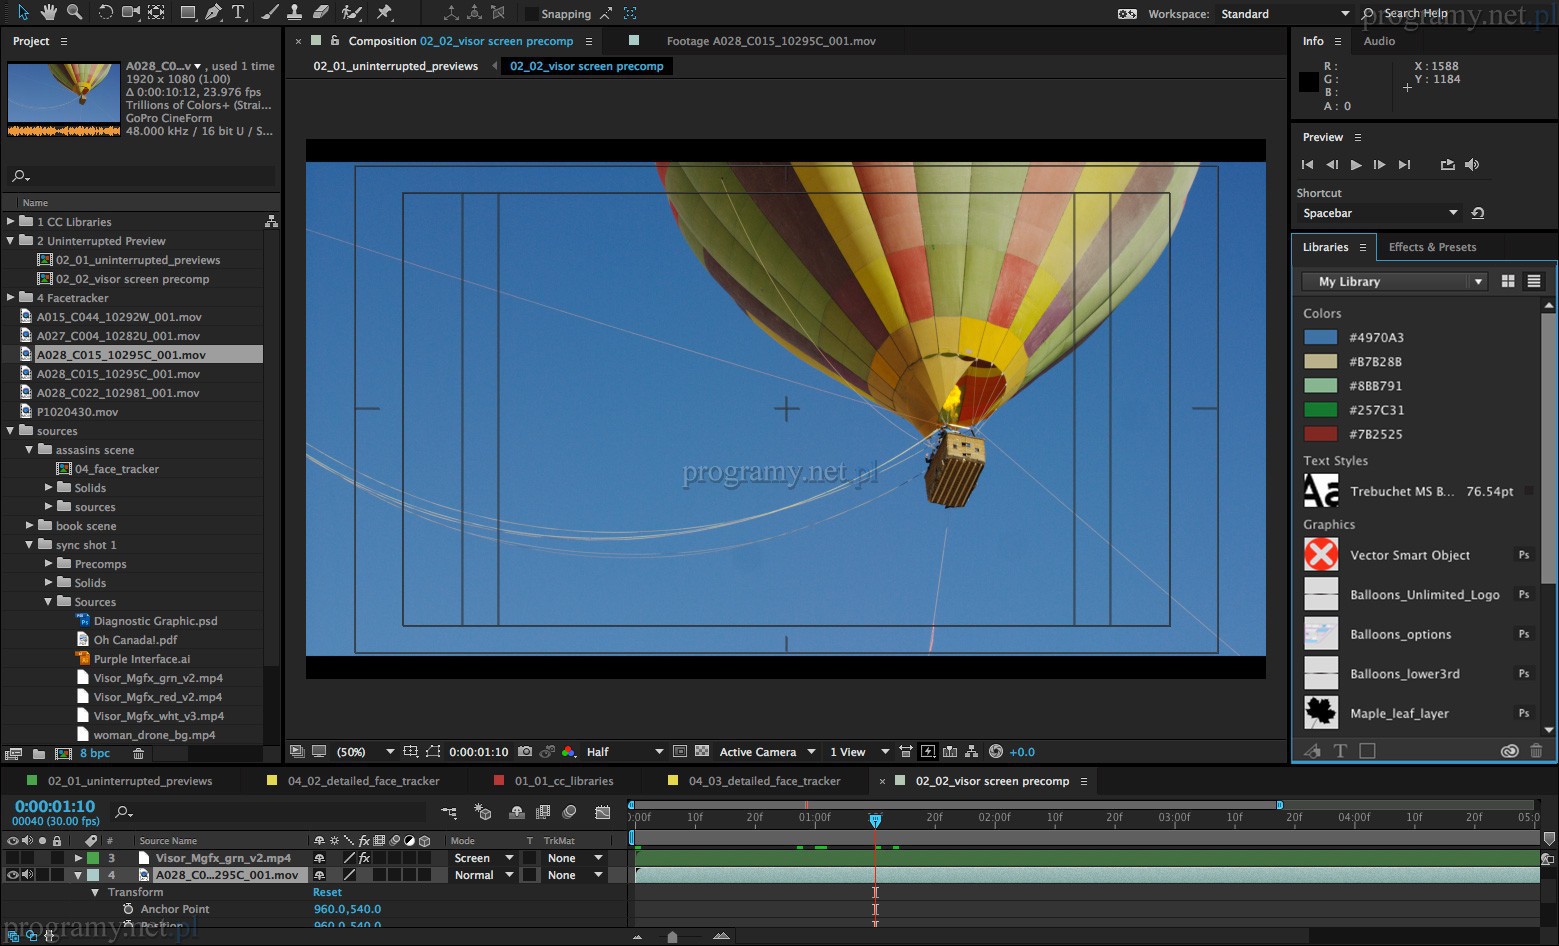 adobe after effects free download 2021